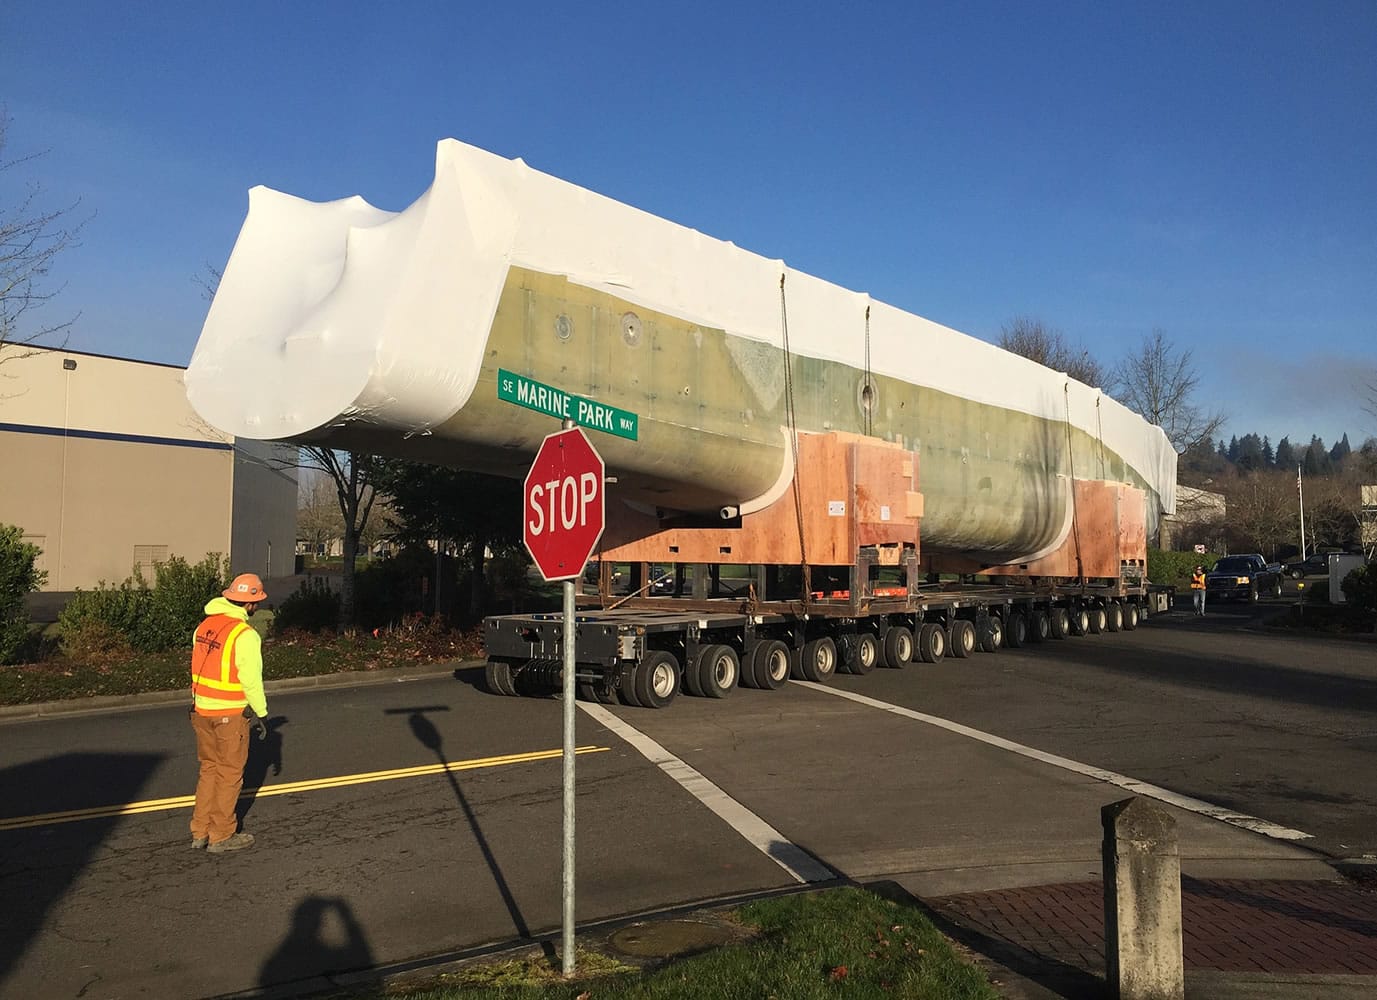 Moving crews removed this boat hull out of the Christensen Shipyards at 4400 S.E. Columbia Way on Feb. 12, three days after the company halted production at the manufacturing site. The hull was transported to the Columbia River and loaded onto a barge.